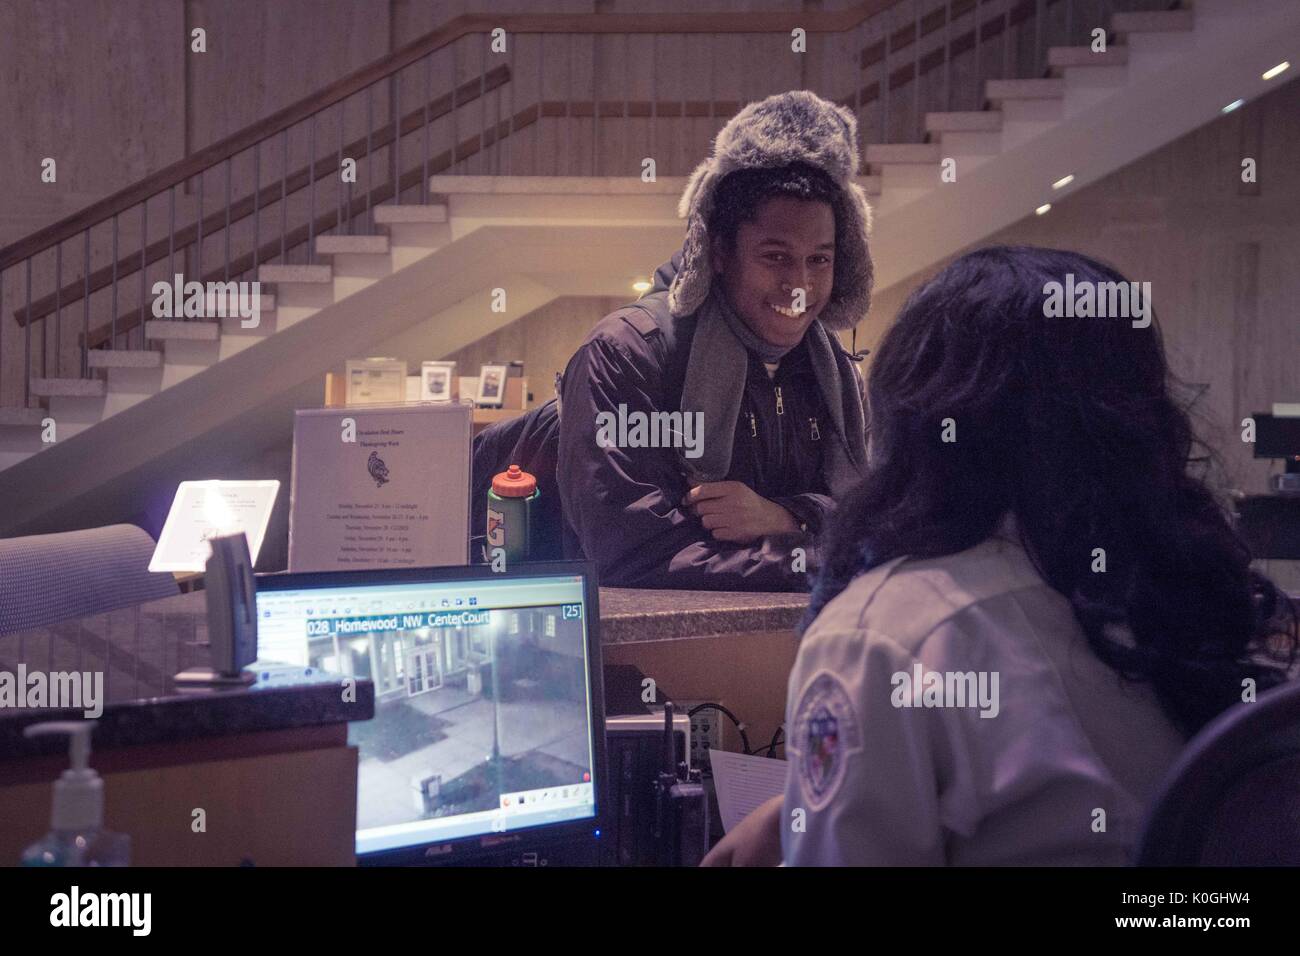 A college student smiles as he talks with a security guard who works at the Milton S. Eisenhower Library on the Homewood campus of the Johns Hopkins University in Baltimore, Maryland, 2014. Courtesy Eric Chen. Stock Photo